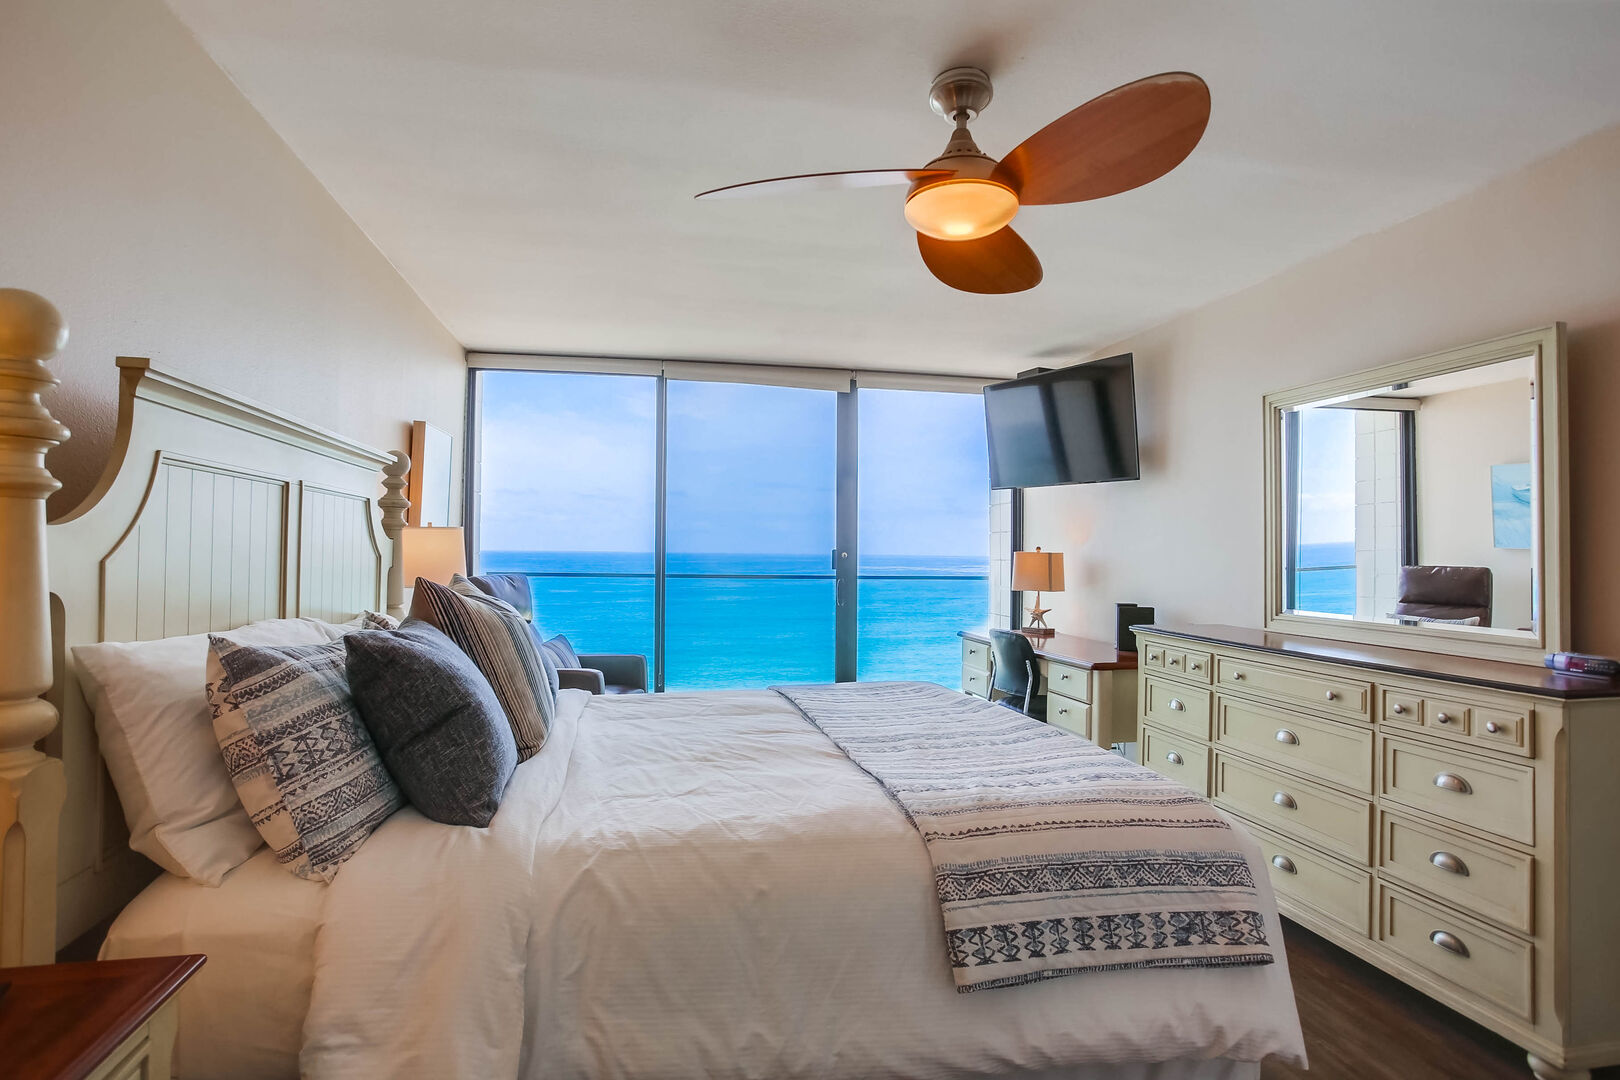 Master bedroom with dresser, ceiling fan, king size bed, dressers, TV and an ocean view